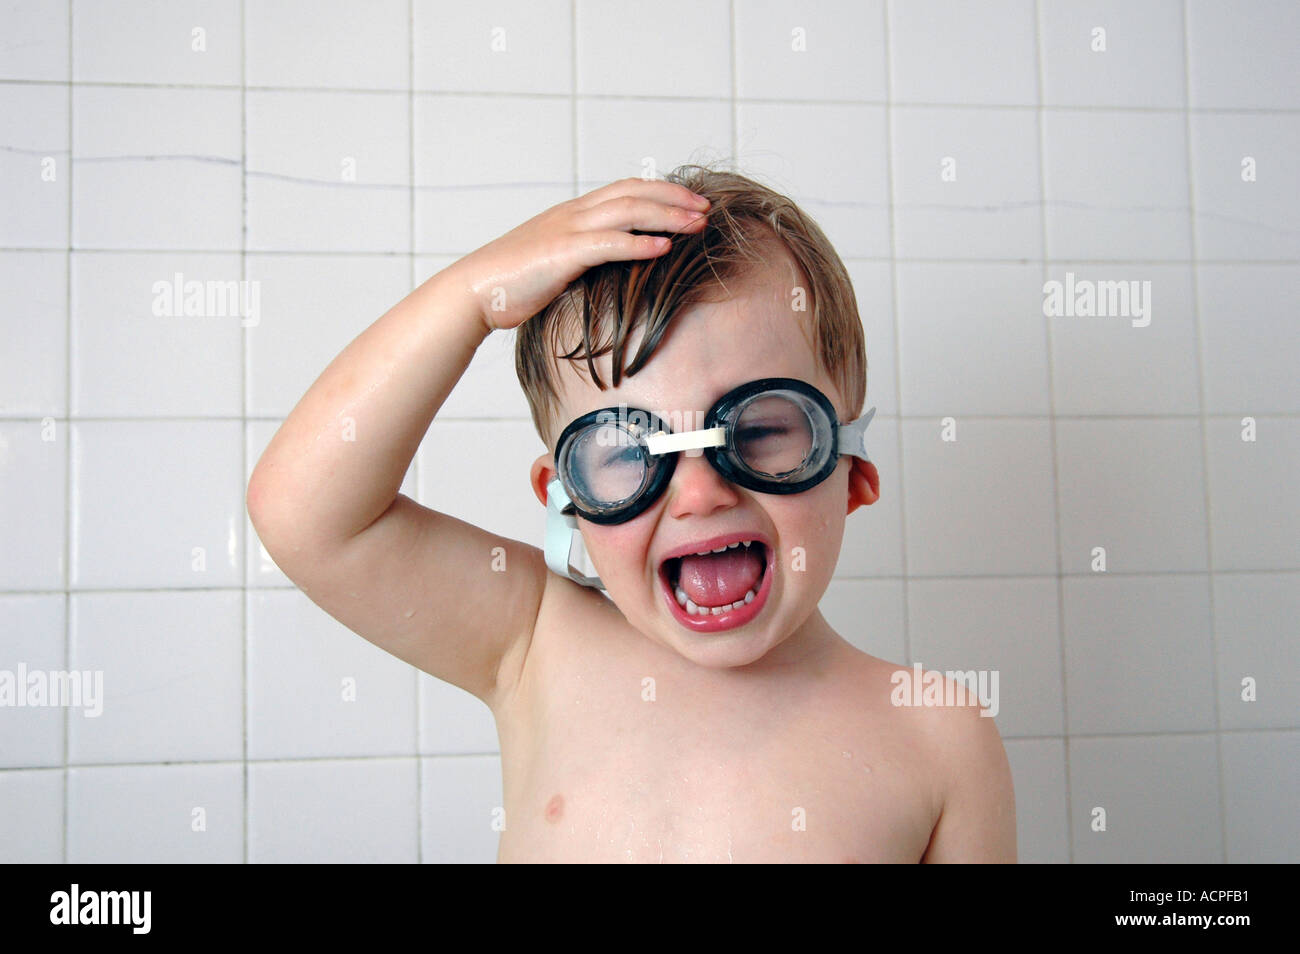 Small boy in tub wearing swimmers goggles making funny face. Stock Photo